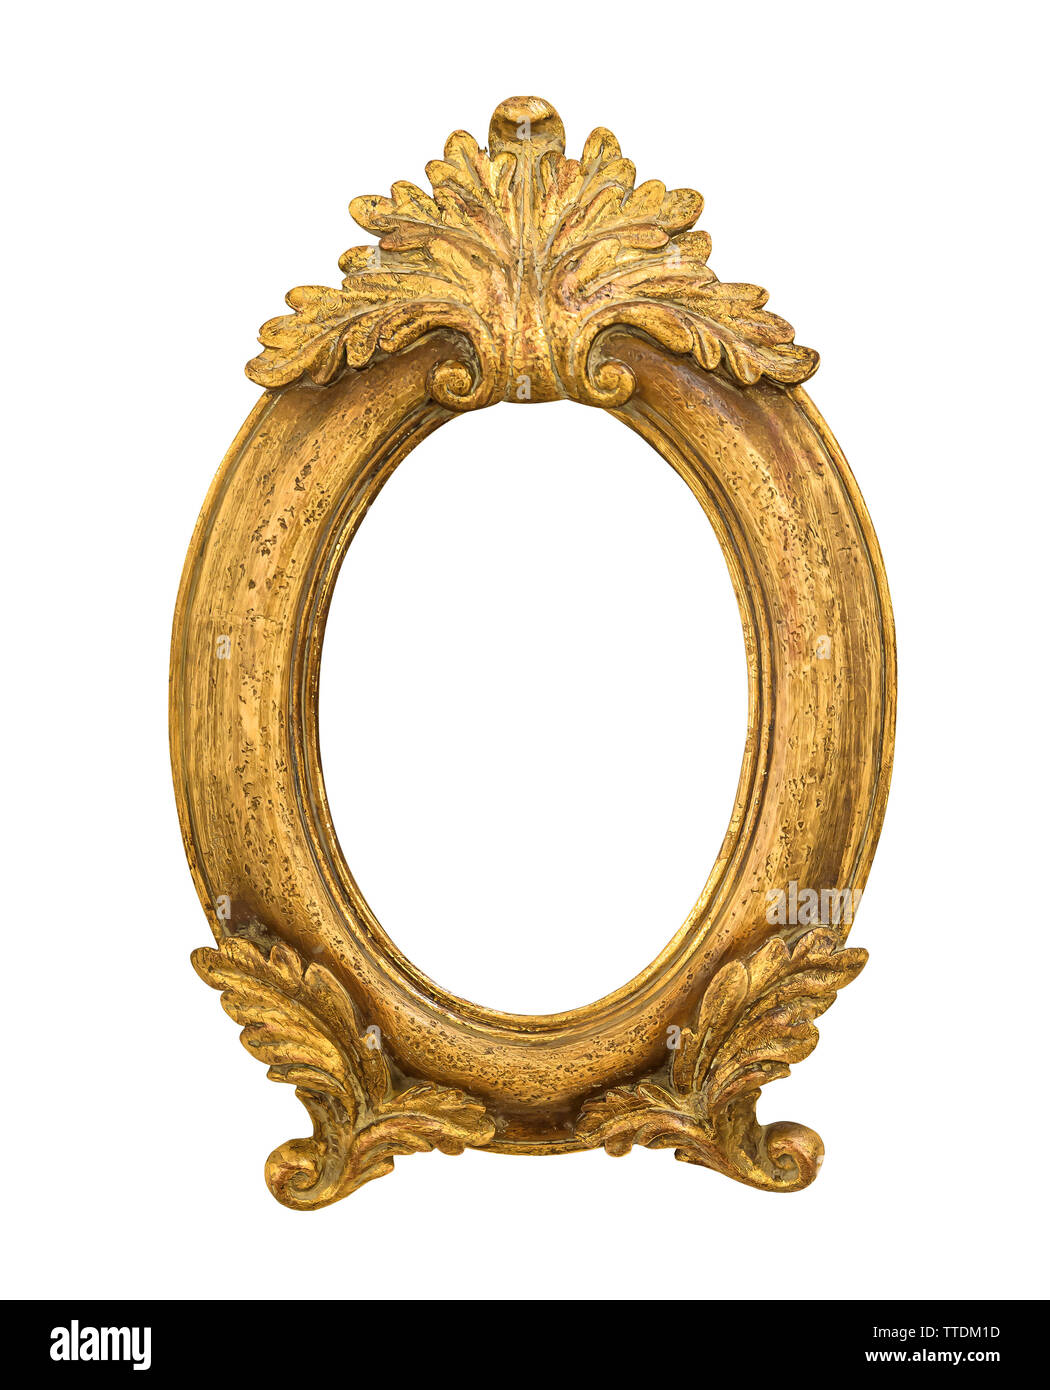 solid brass oval photo frame vintage Victorian or French style picture frame wall hanging frame ornate